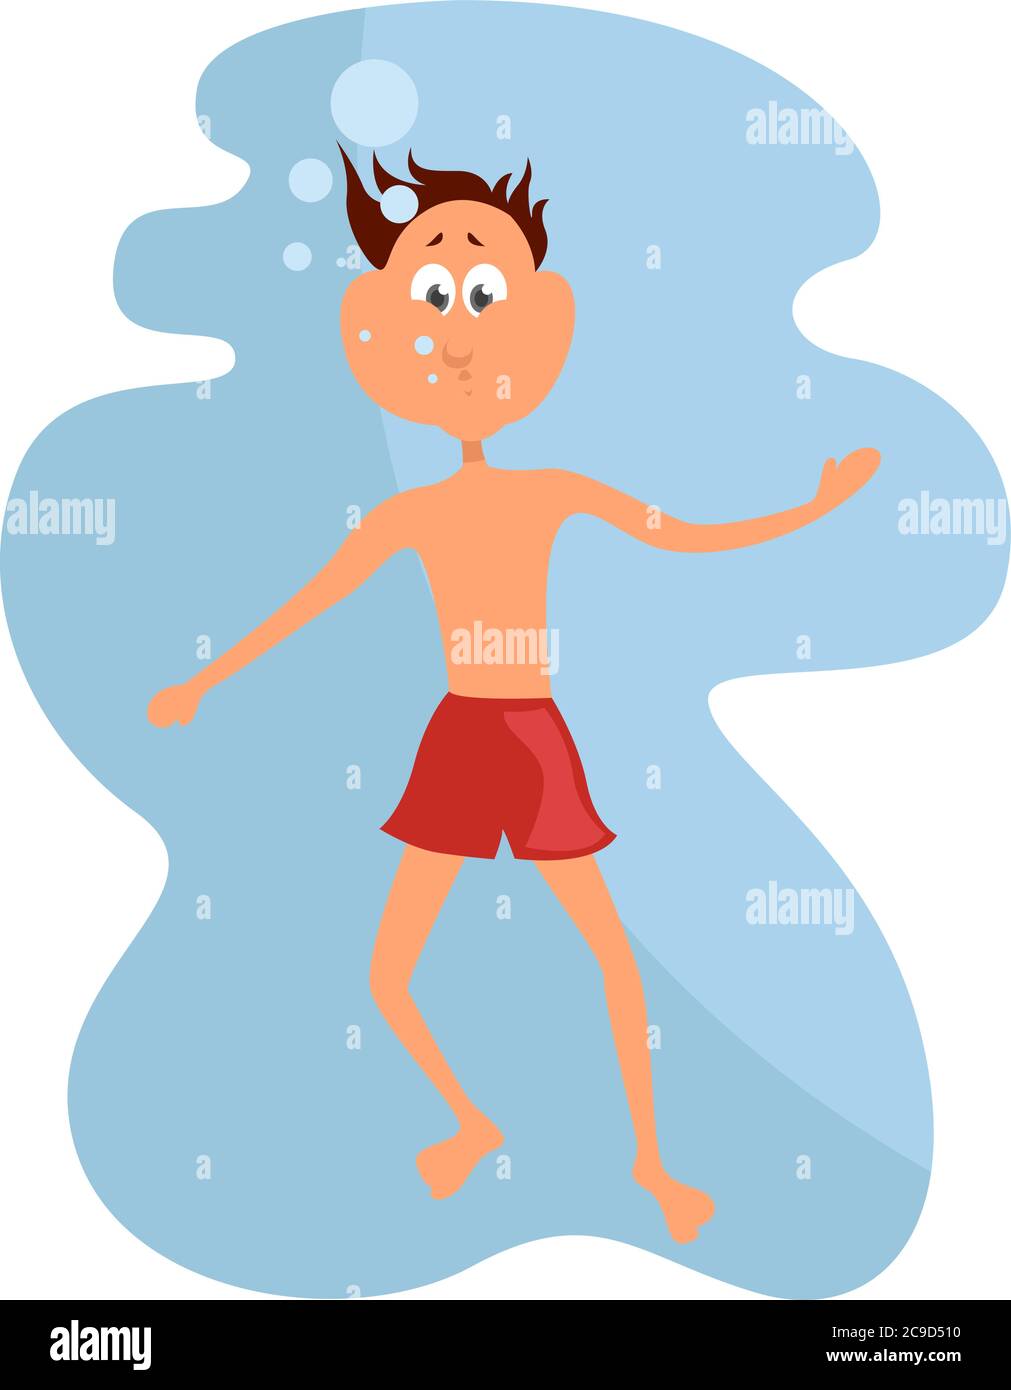 Man drowning, illustration, vector on white background Stock Vector